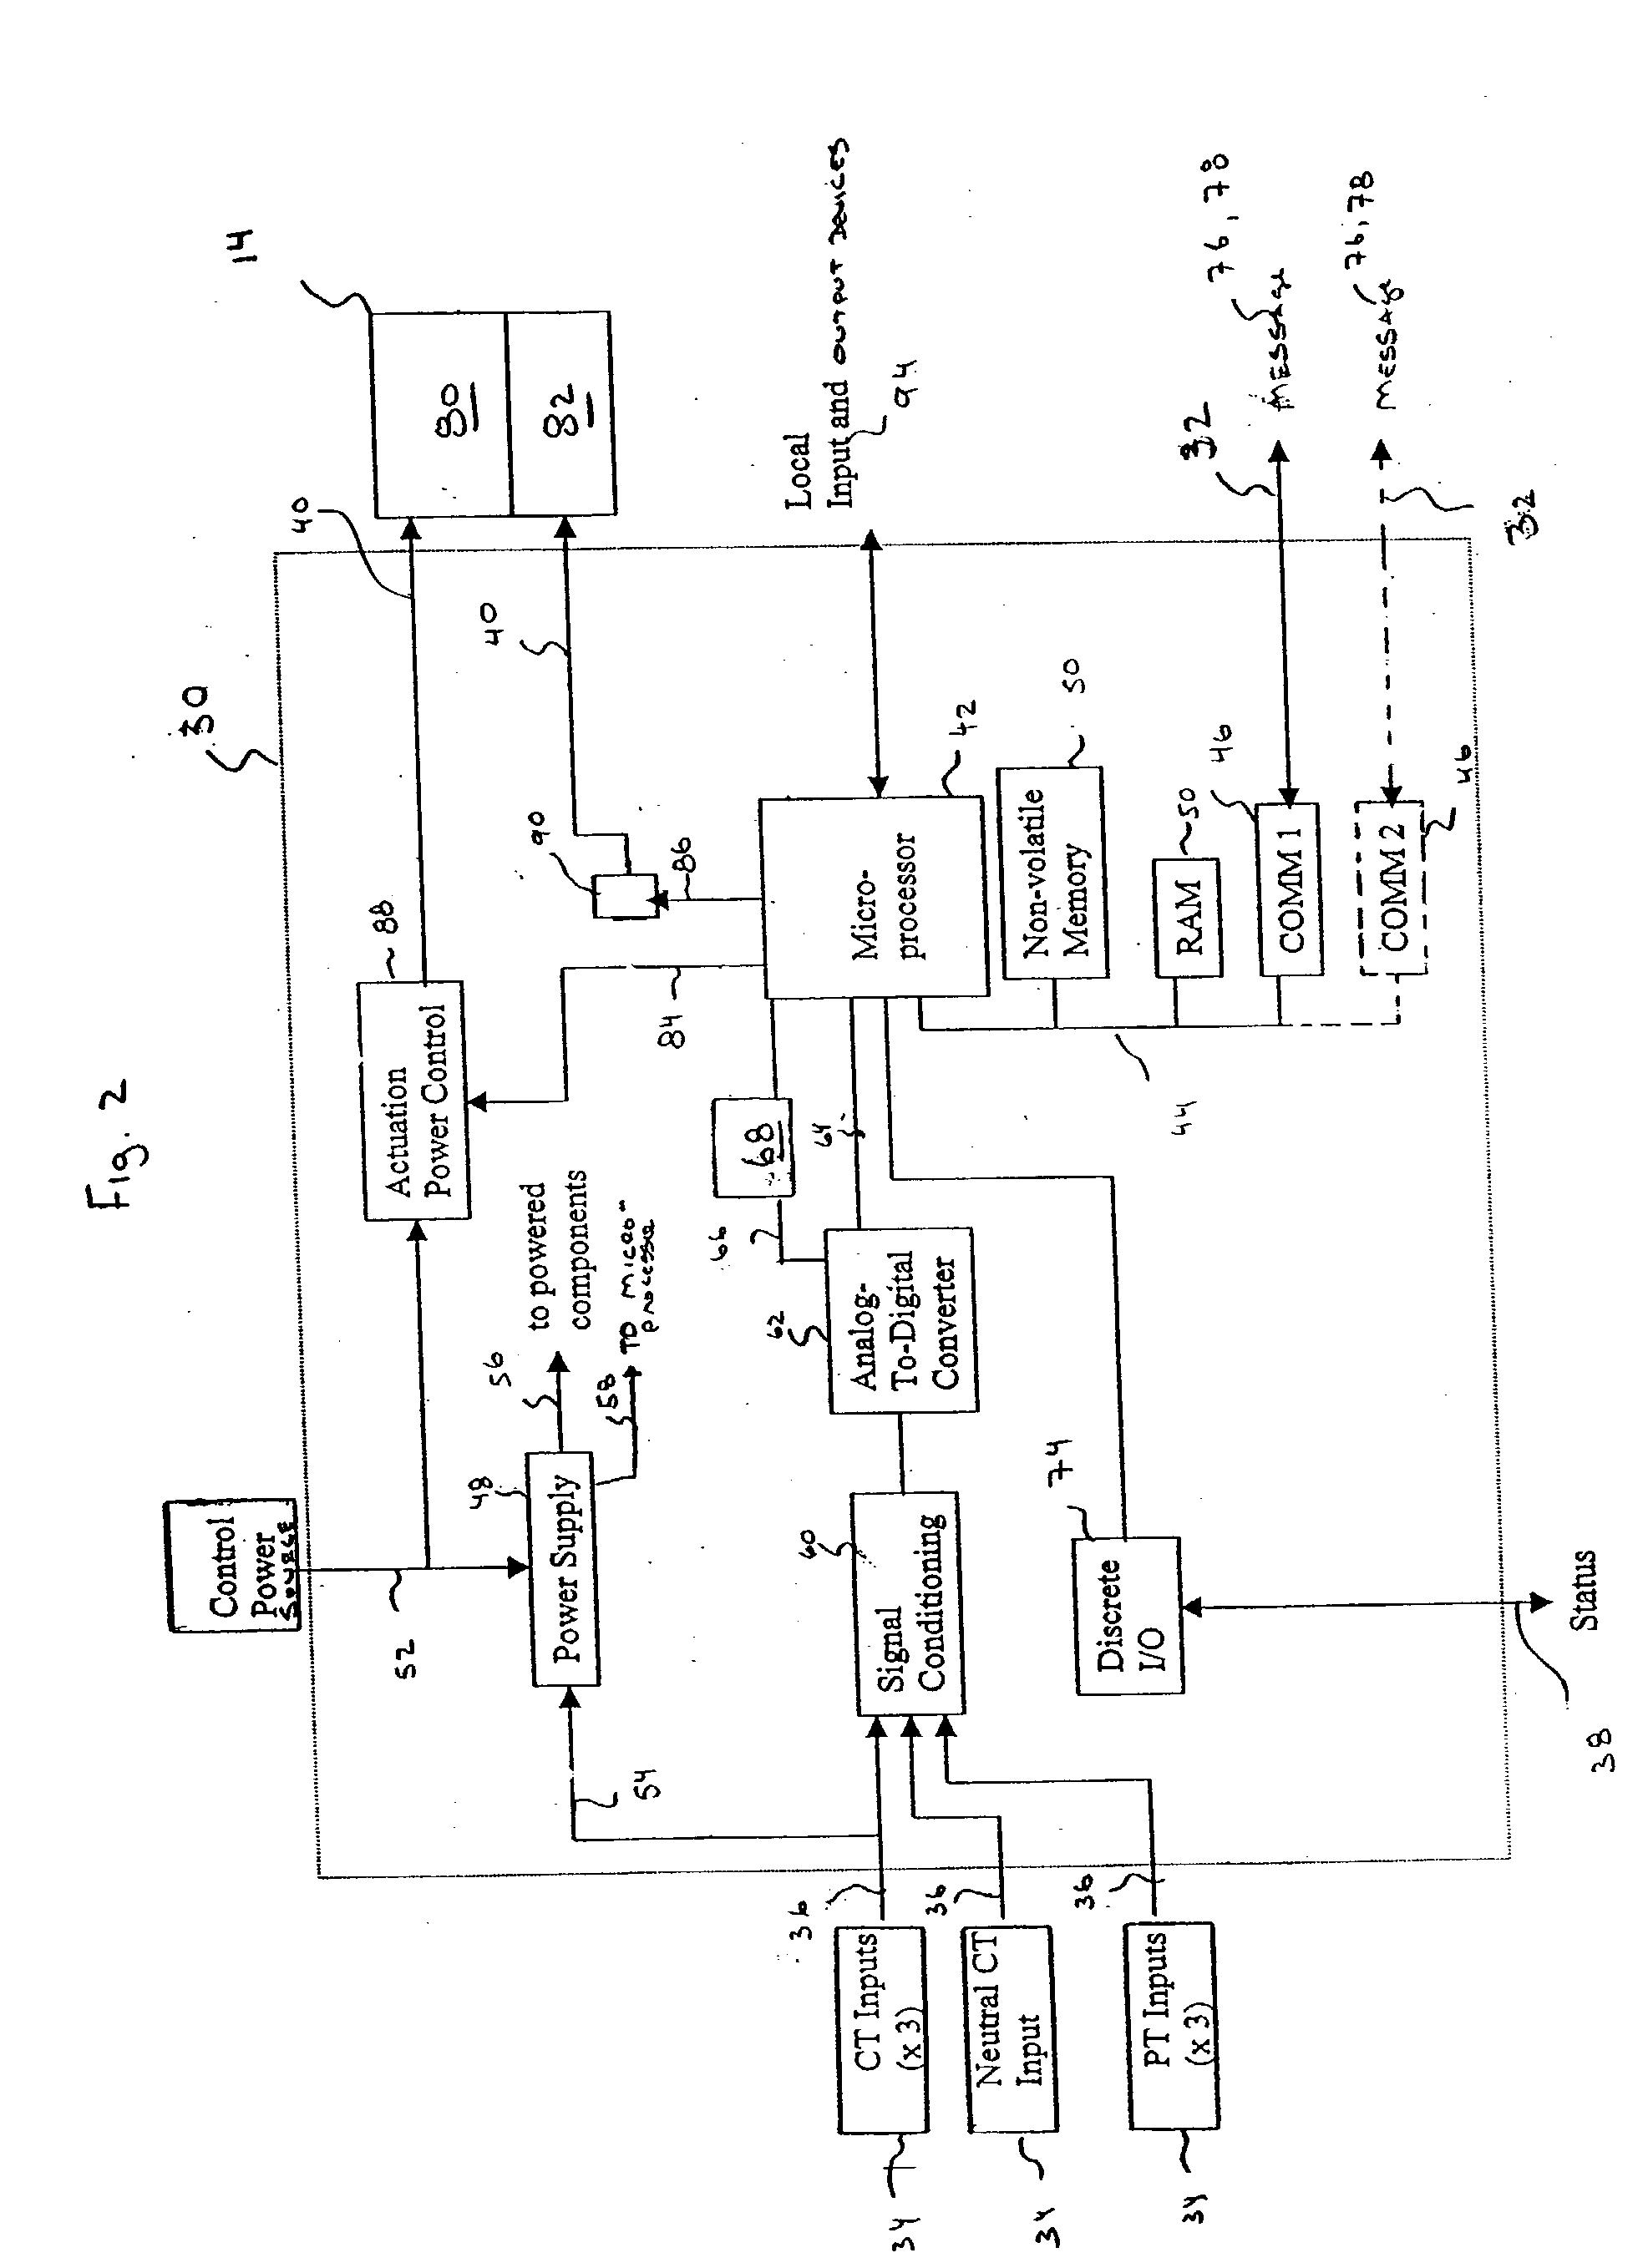 Processing system for a power distribution system